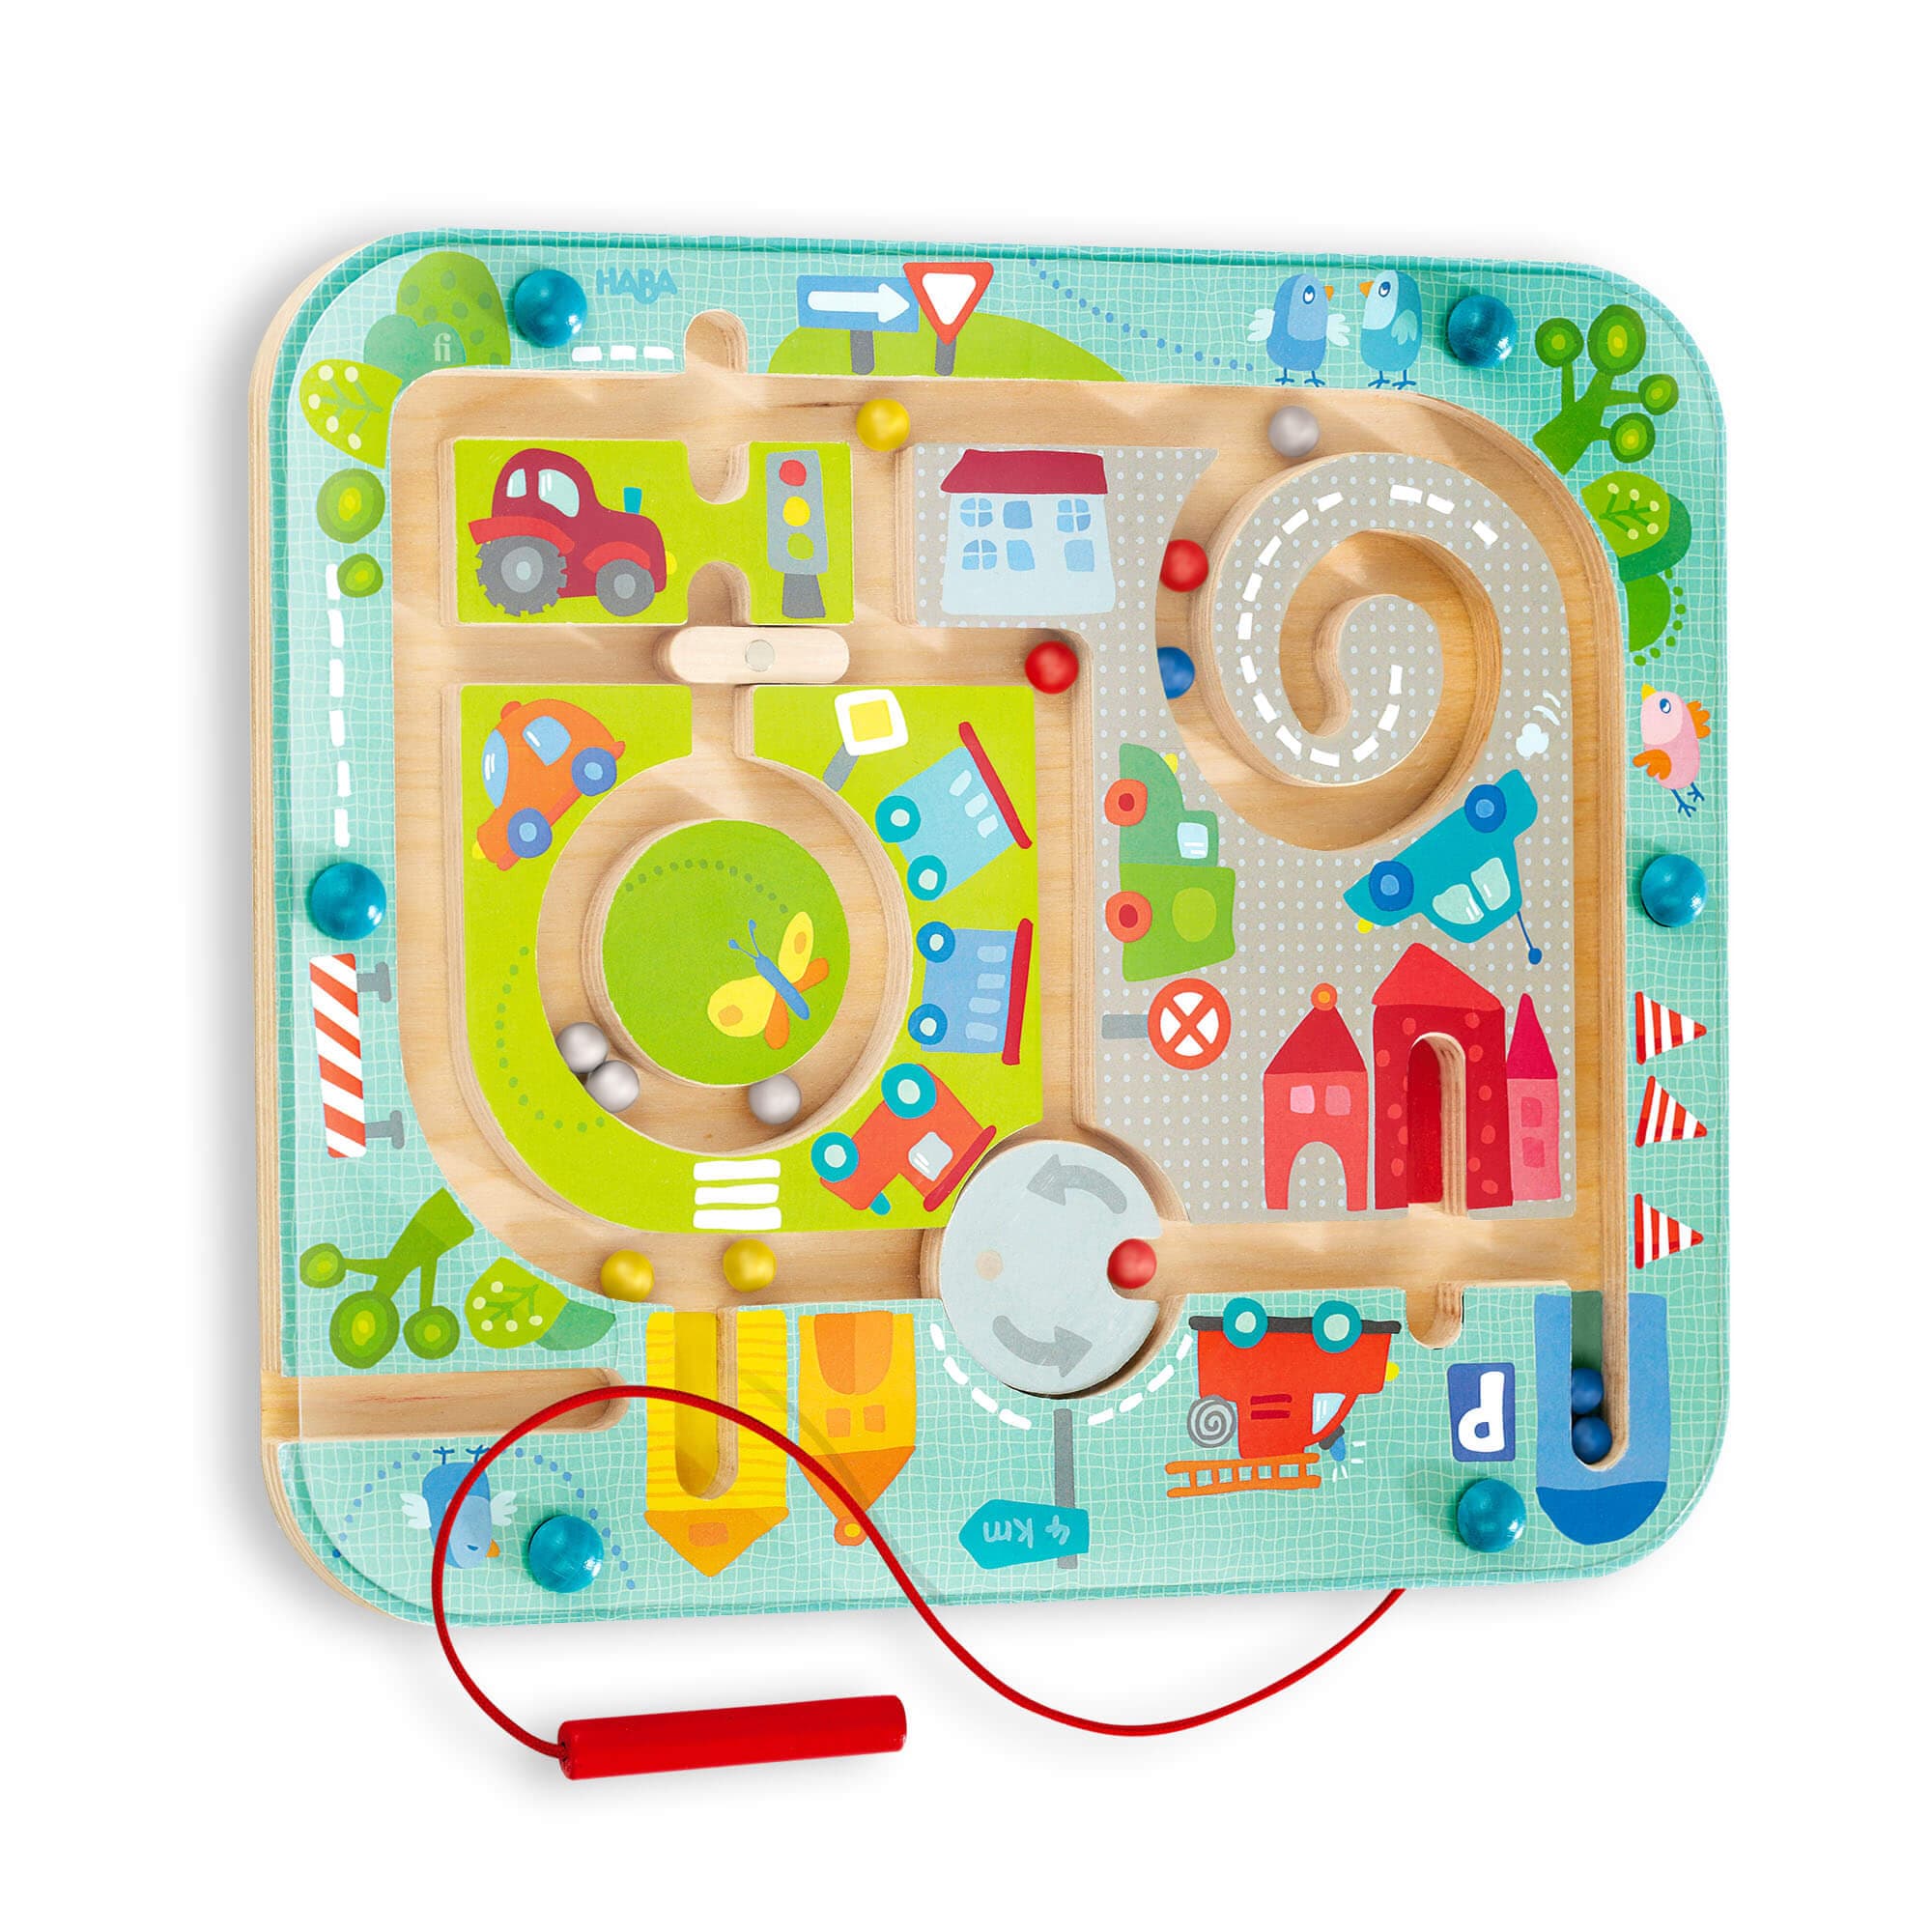 Verstrikking Bekritiseren Ongepast Town Maze Magnetic Puzzle Game | Durable Toys | HABA USA